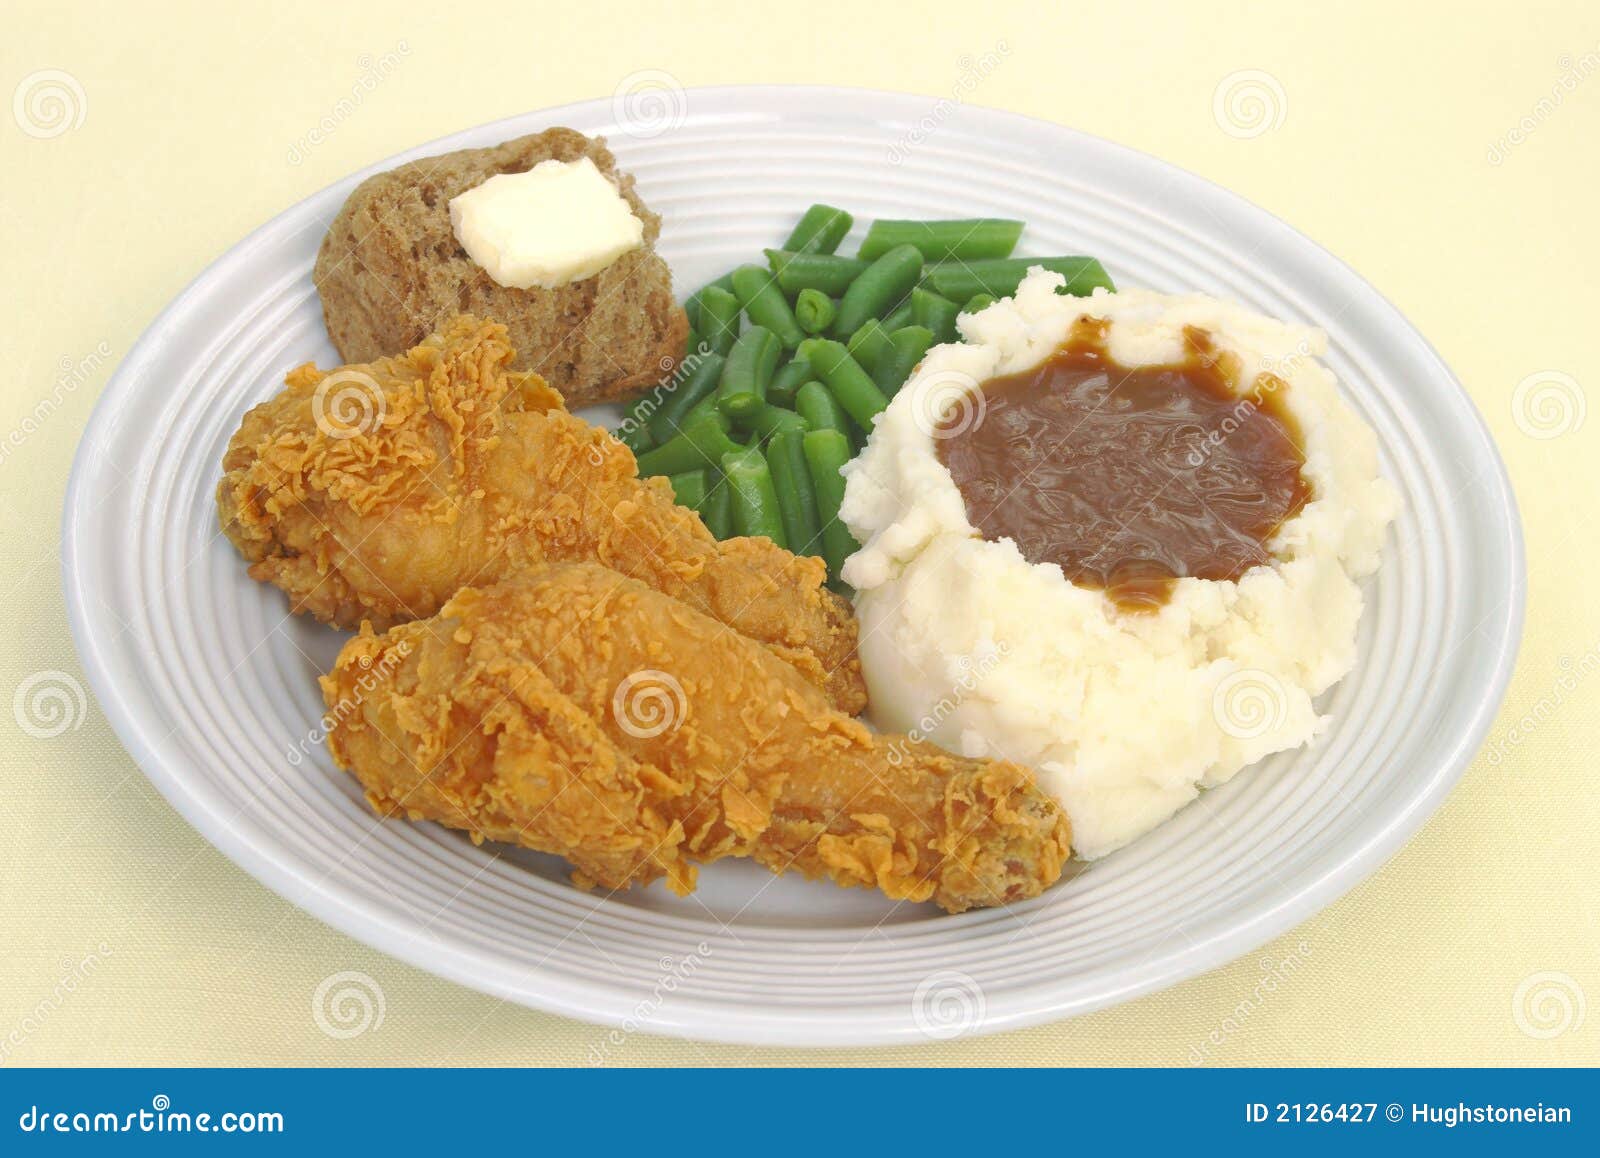 free clipart fried chicken dinner - photo #35